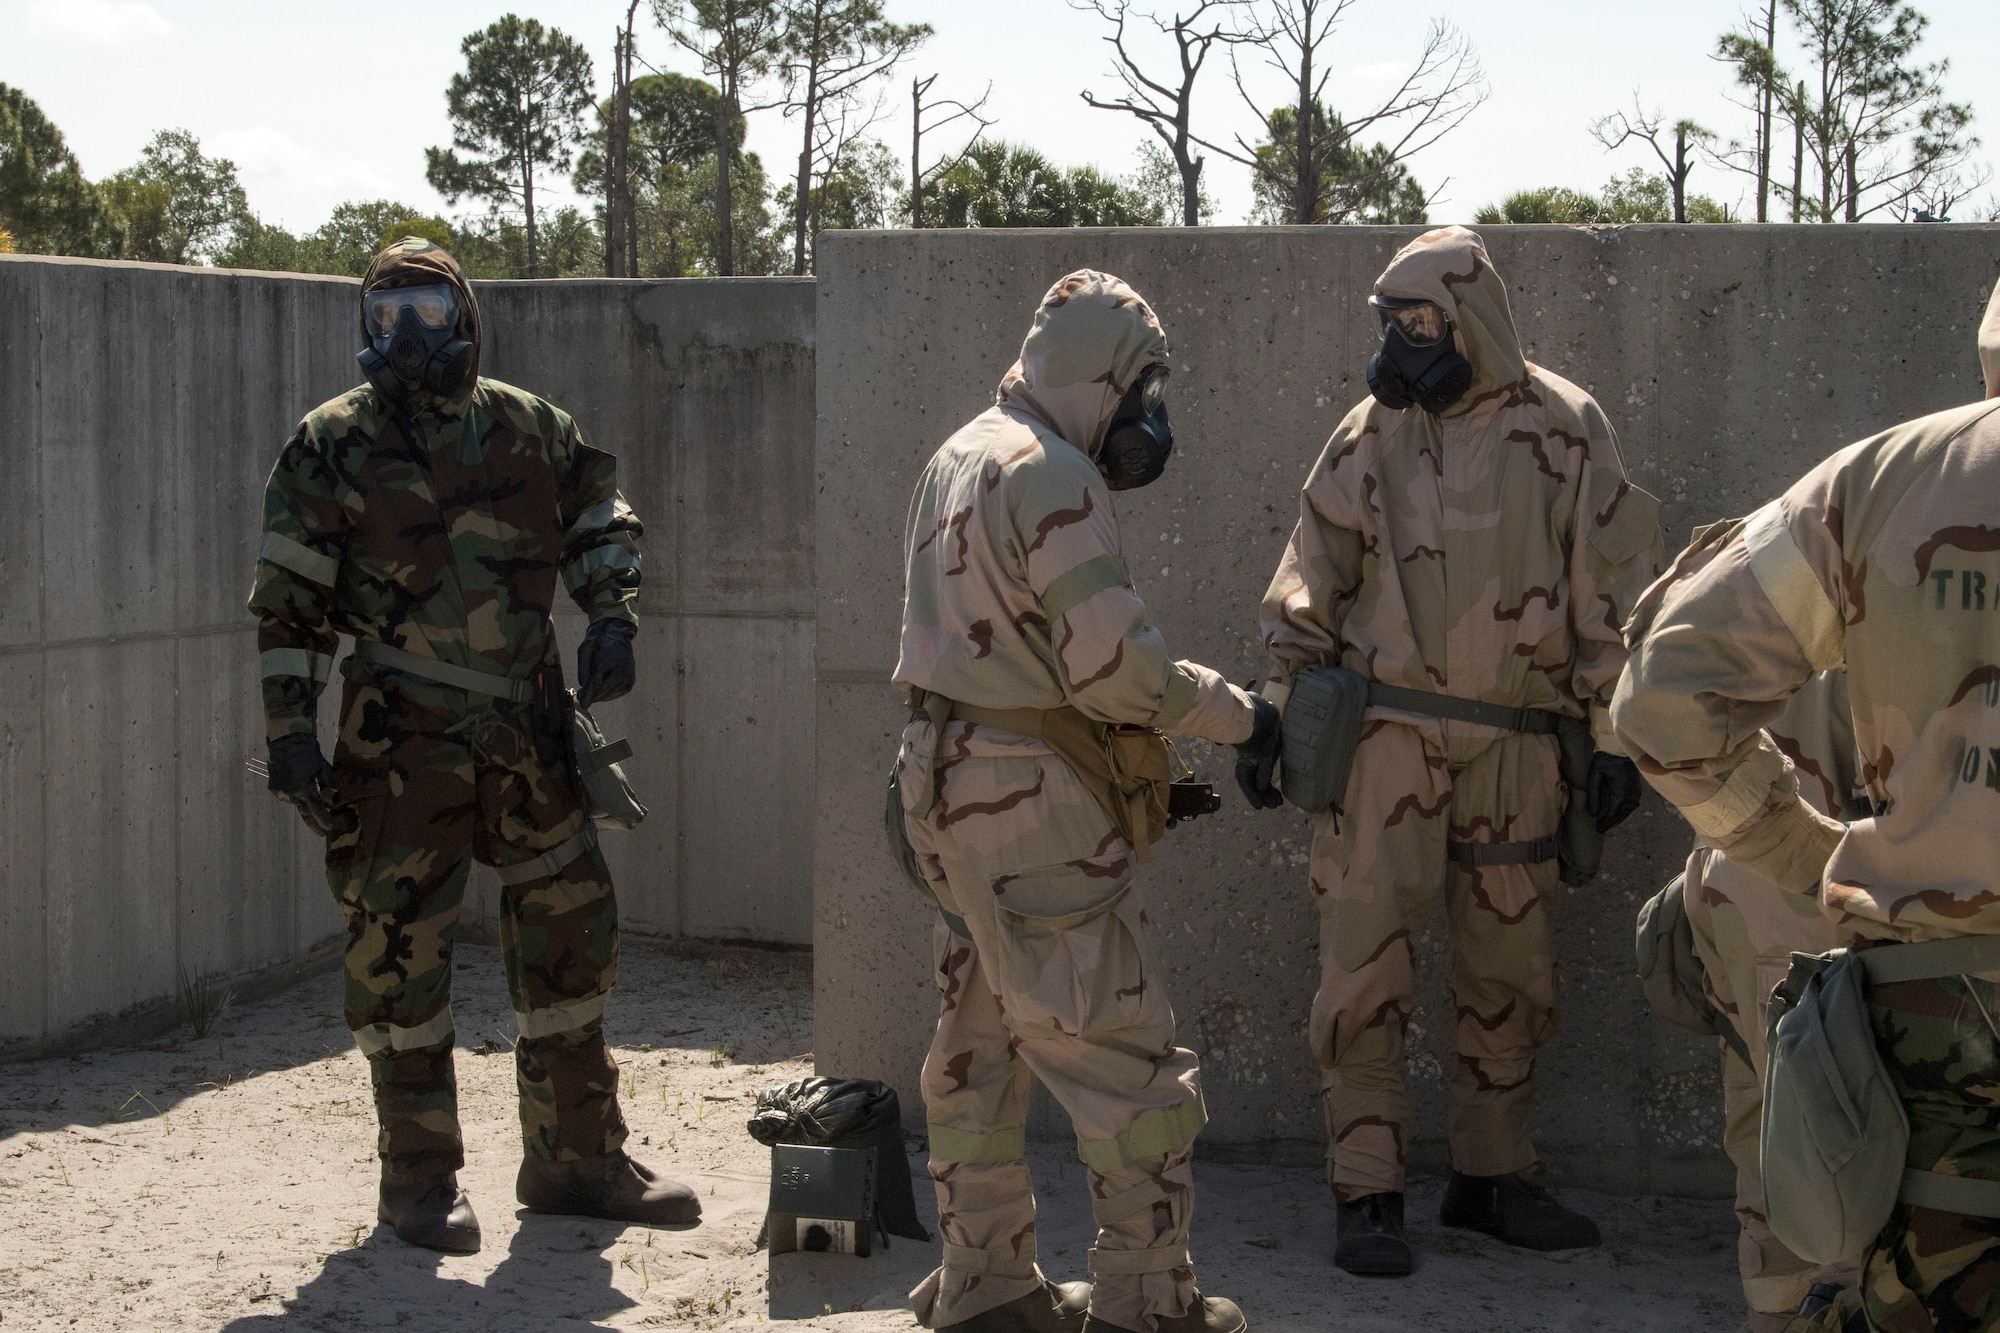 Airmen from the 6th Civil Engineer Squadron Explosive Ordnance Disposal (EOD) conduct demolition disposal training at MacDill Air Force Base, Fla., April 29, 2021.